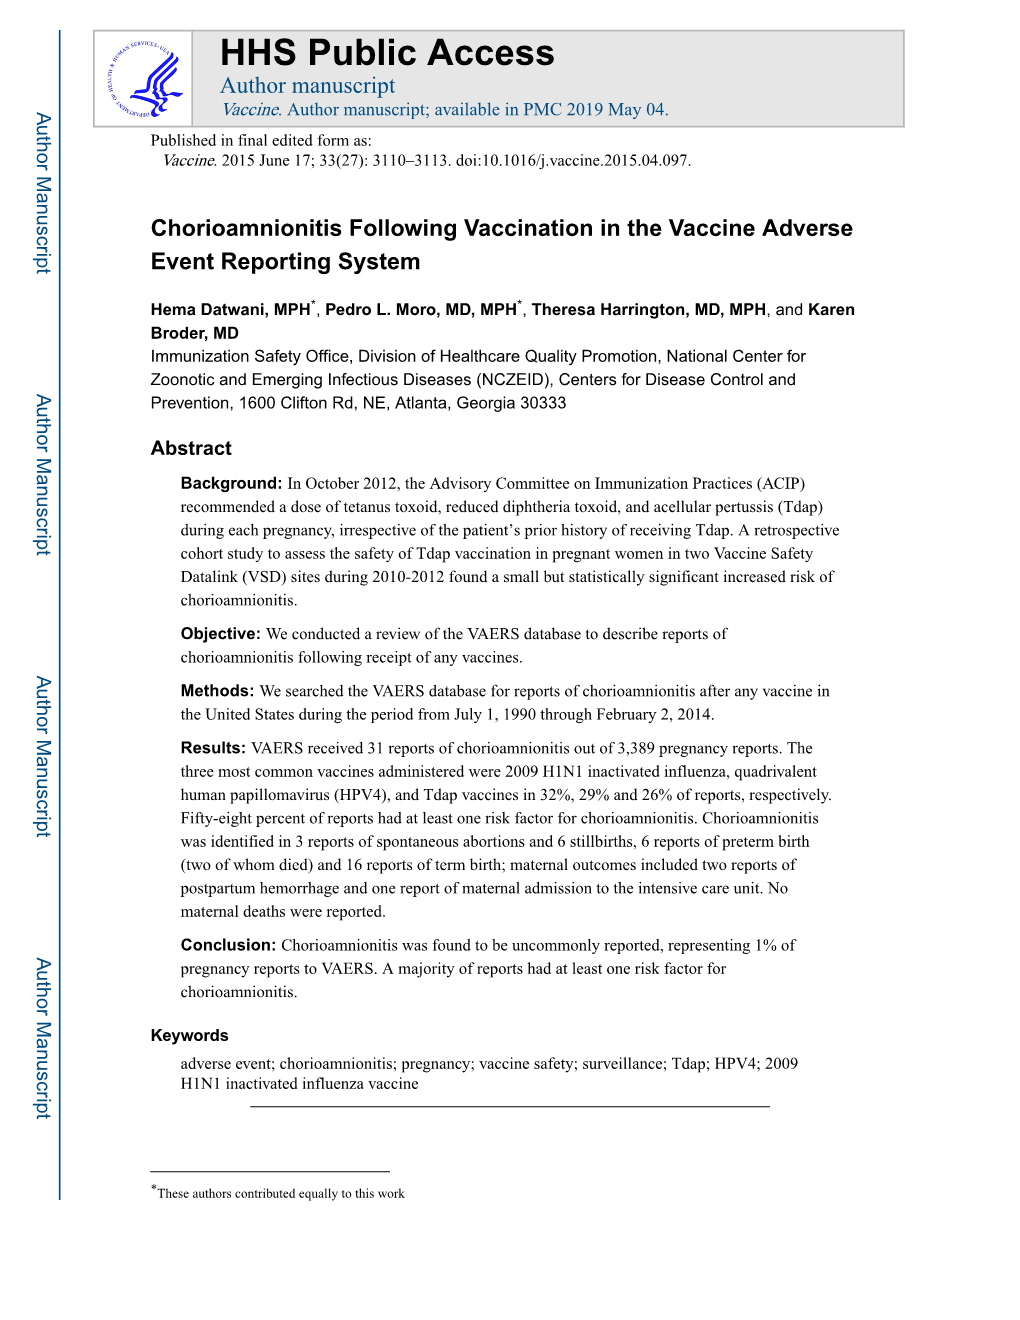 Chorioamnionitis Following Vaccination in the Vaccine Adverse Event Reporting System